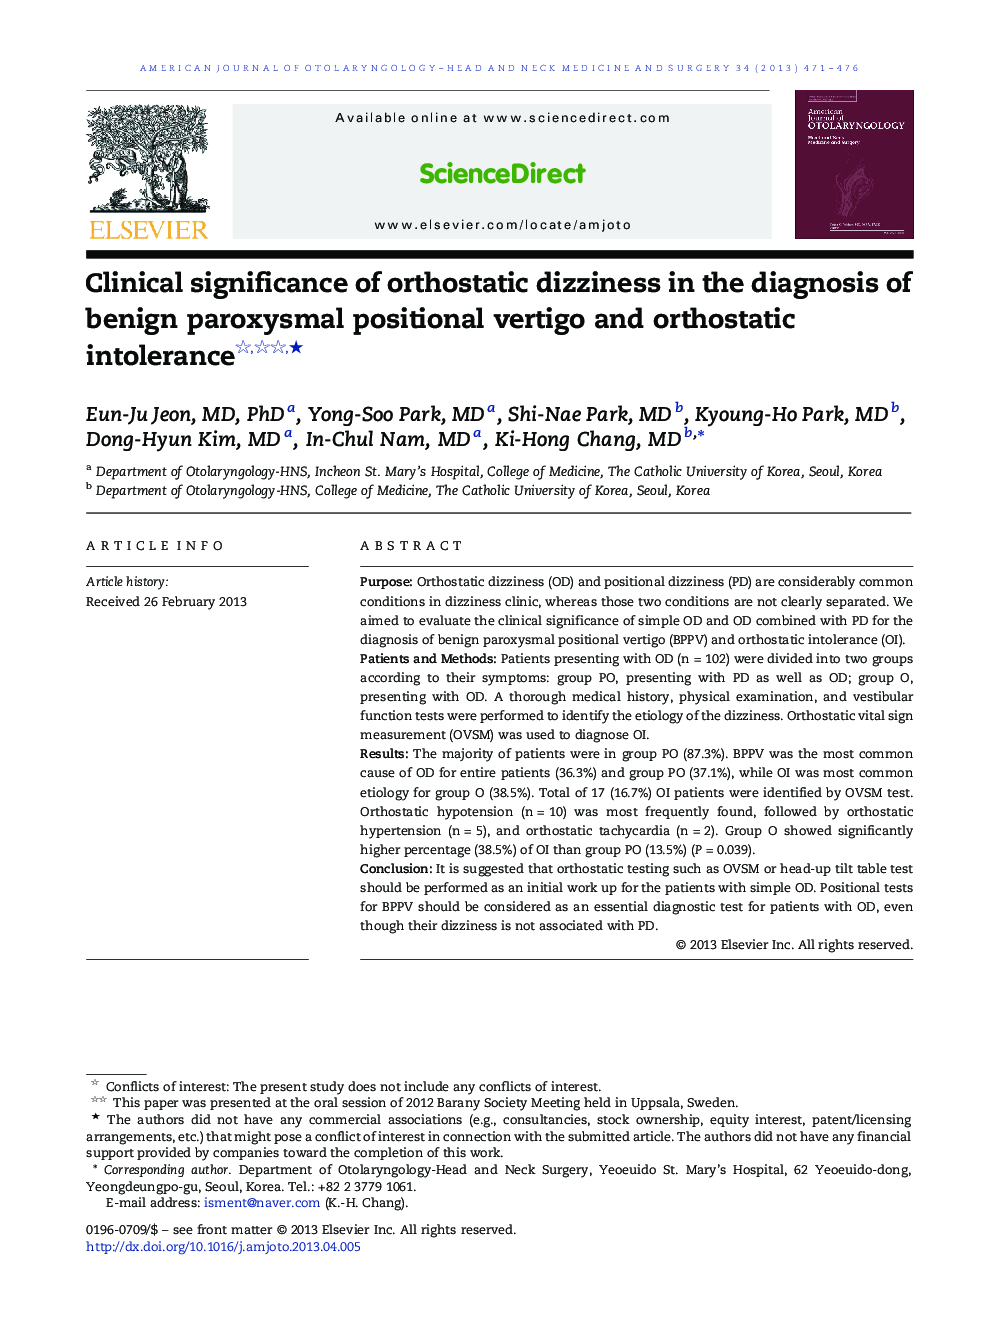 Clinical significance of orthostatic dizziness in the diagnosis of benign paroxysmal positional vertigo and orthostatic intolerance ★